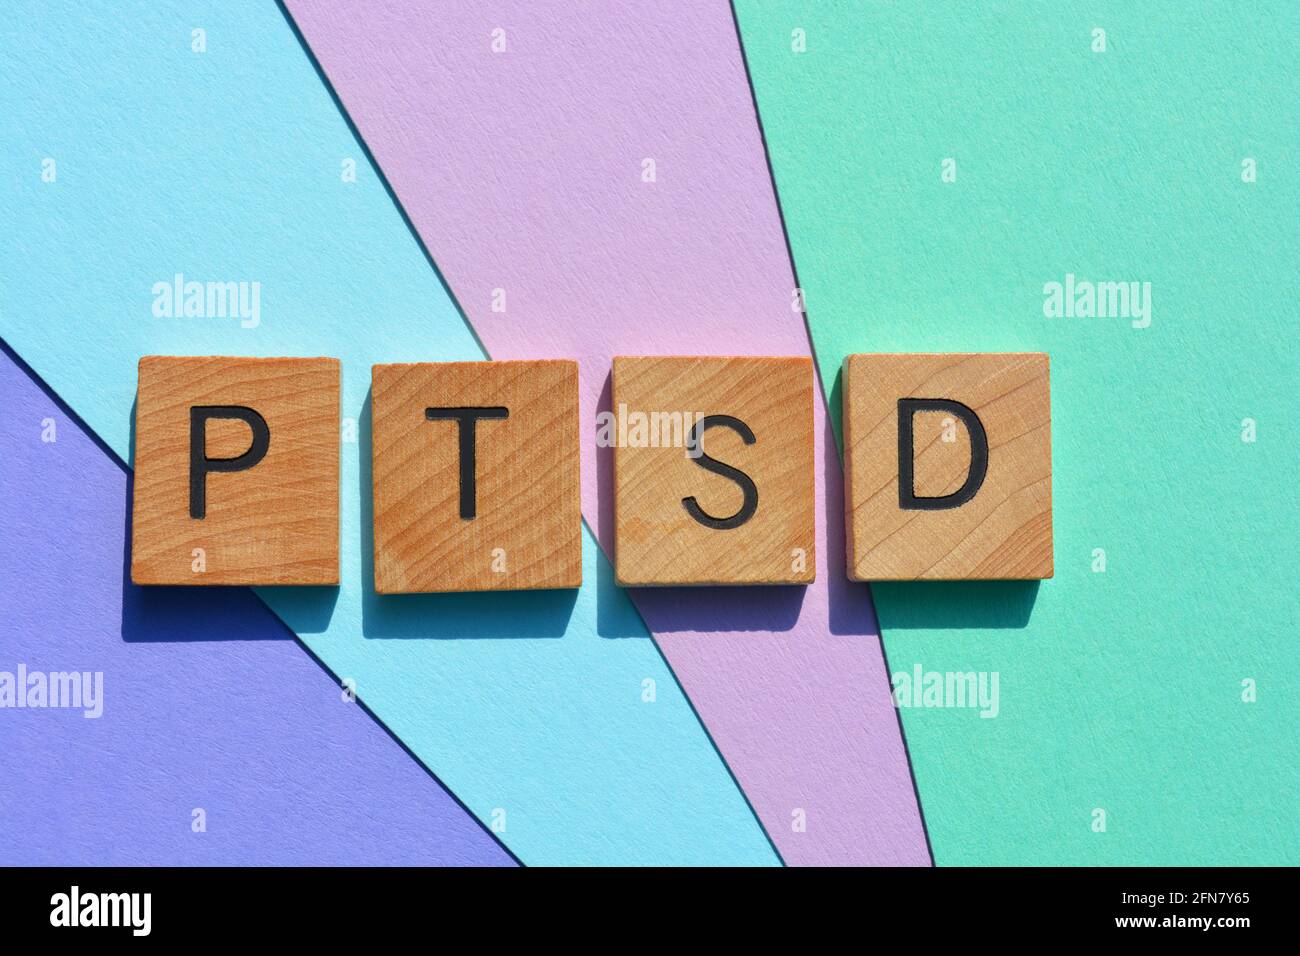 PTSD, acronym for Post Traumatic Stress Disorder in wooden alphabet letters Stock Photo